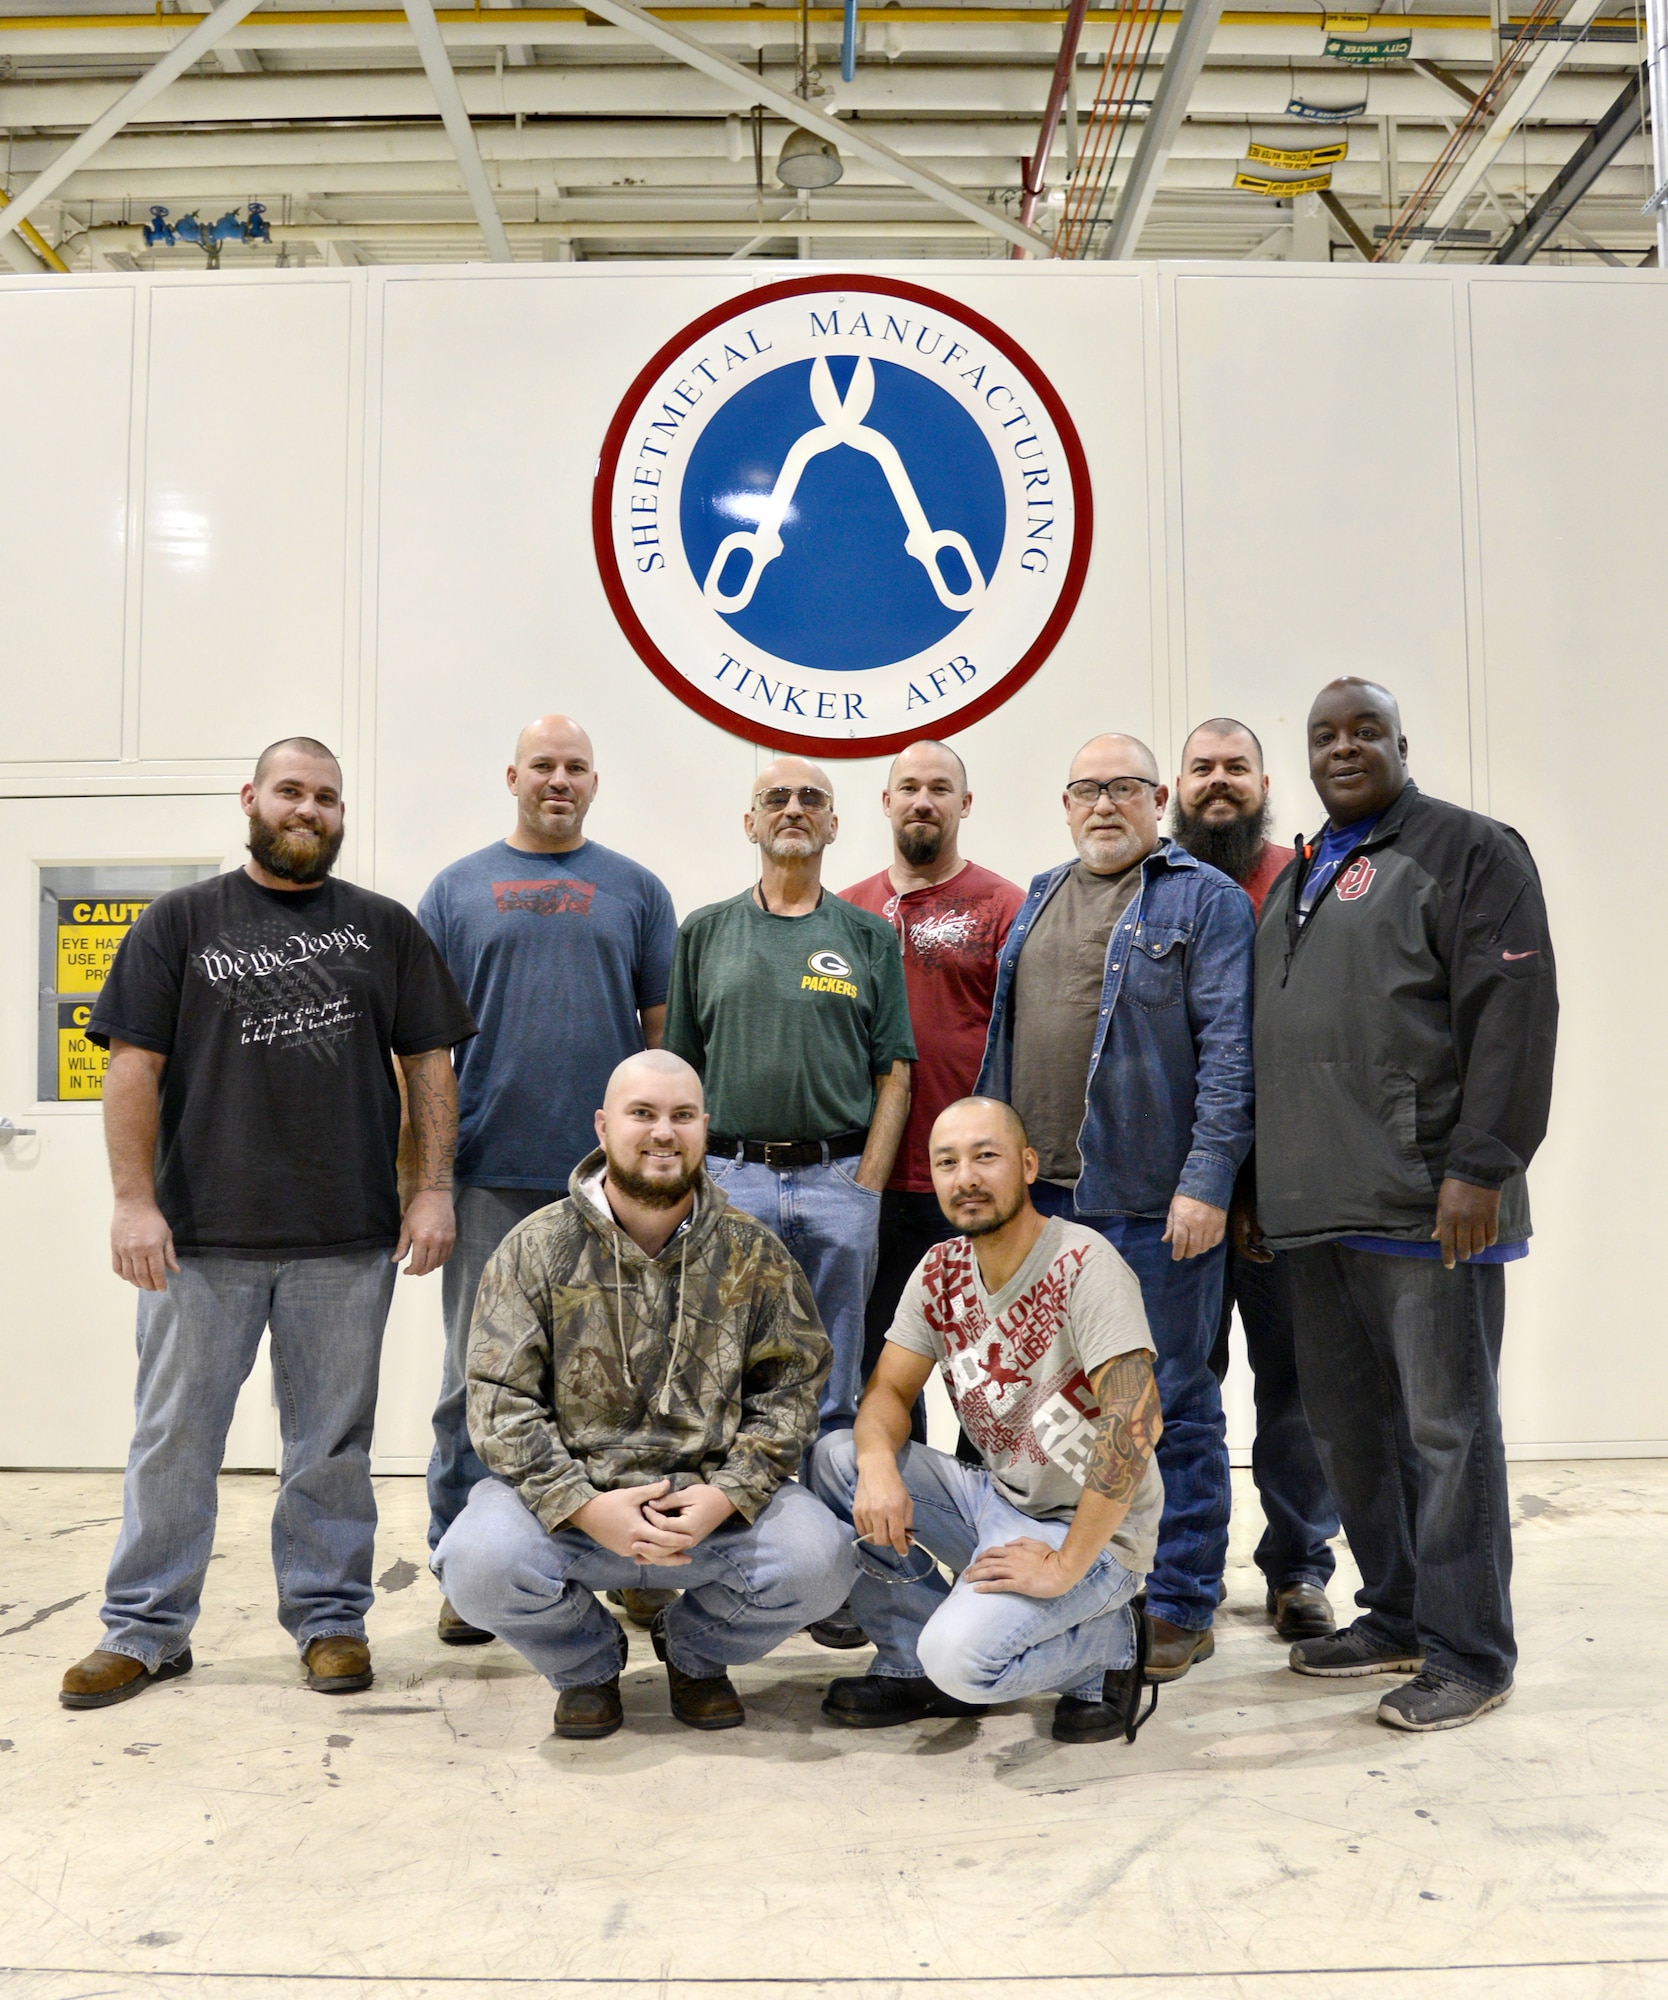 Co-workers in the 551st Commodities Maintenance Squadron showed their support of a colleague and friend by shaving their heads when they found out he had cancer and had to go through chemotherapy. Pictured are, back row, from left, Billy Wiens, Scott Allen, Ralph Odonnell, Paul Sechrist, Eddy Roundtree, Jason Kramer and Alonzo Harris. Front, from left, are Joshua Alexander and Klein Nguyen. Not pictured is their other co-worker LaDean Allen. (Air Force photo by Kelly White/Released)